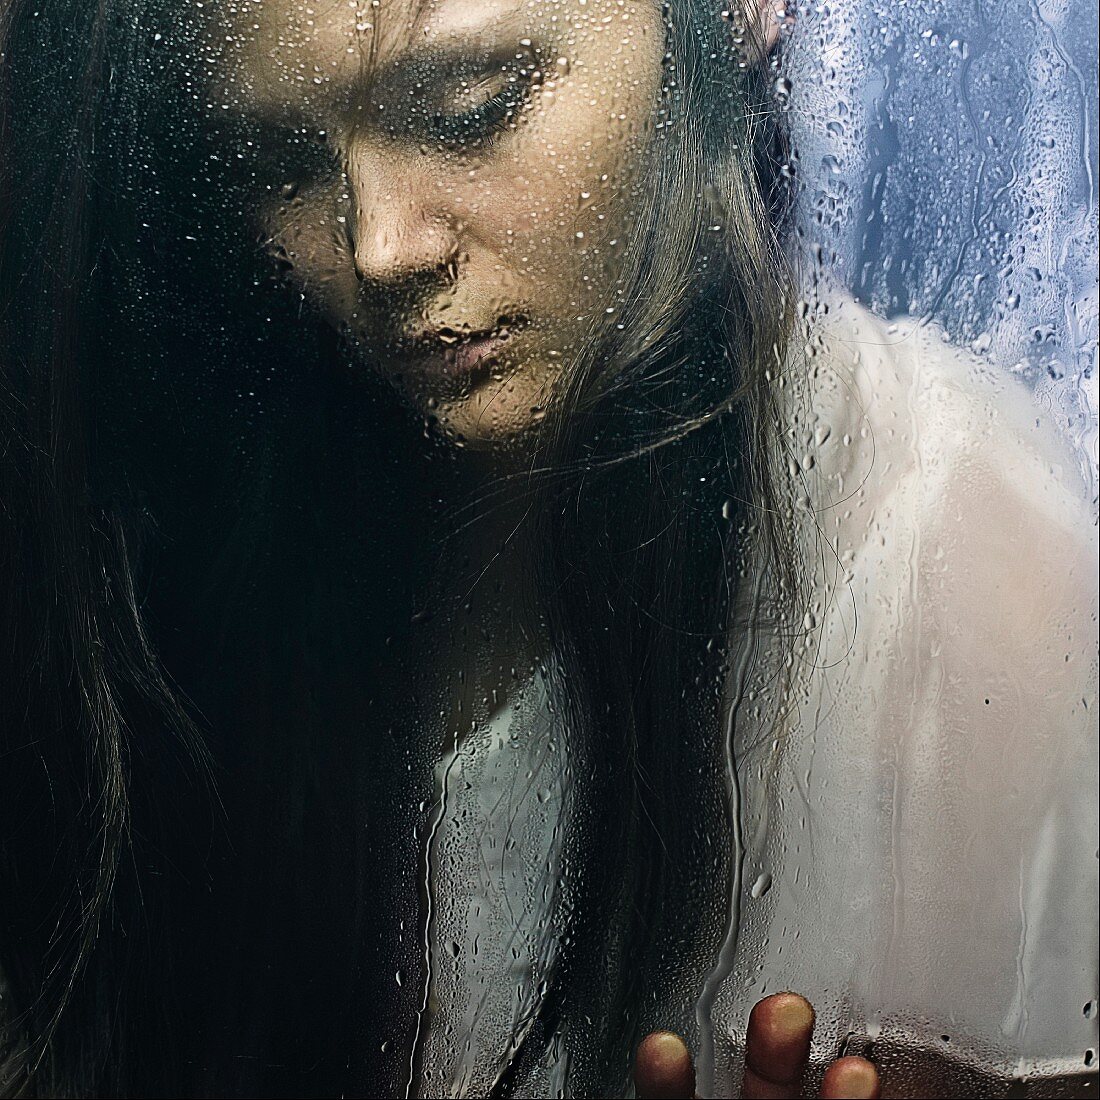 A young, depressed-looking woman behind a wet glass panel